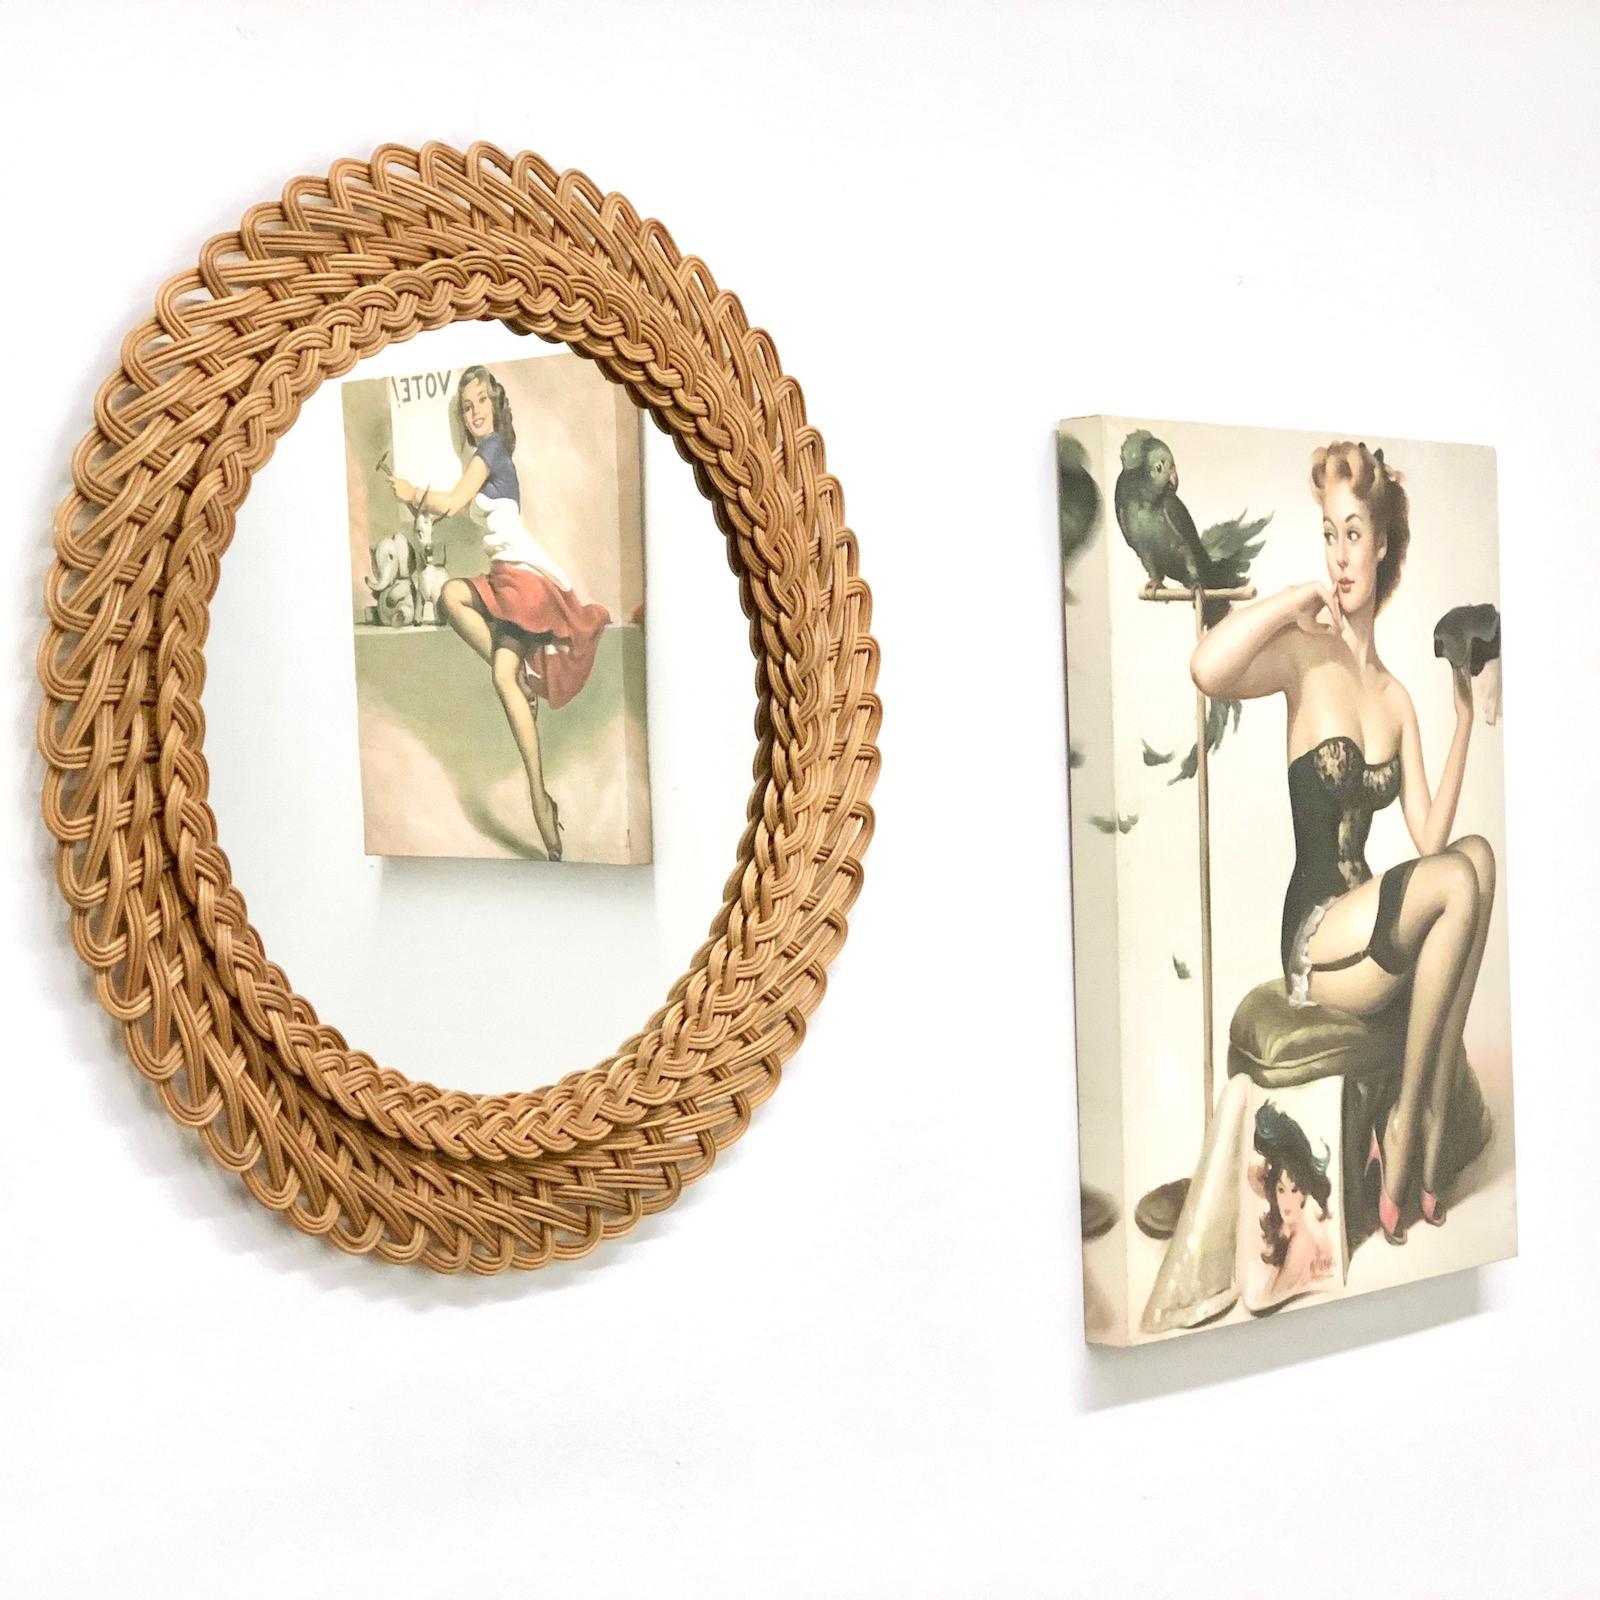 A beautiful handwoven round shaped rattan and wicker mirror. This mirror has a handcrafted braided work at the frame that makes it highly decorative, Germany, 1960s. Mirror only is approximate 13 3/4